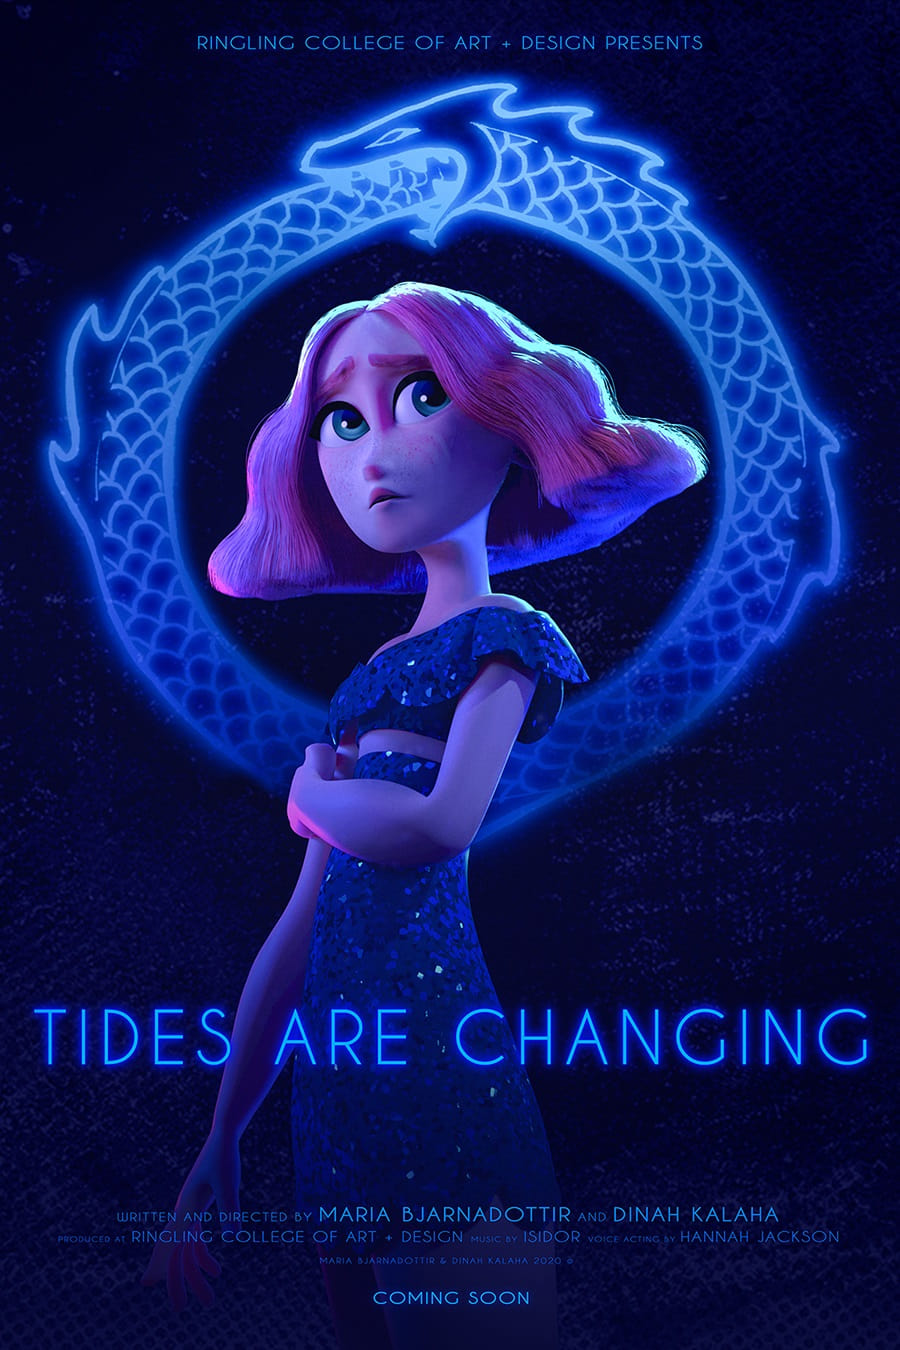 Tides are Changing